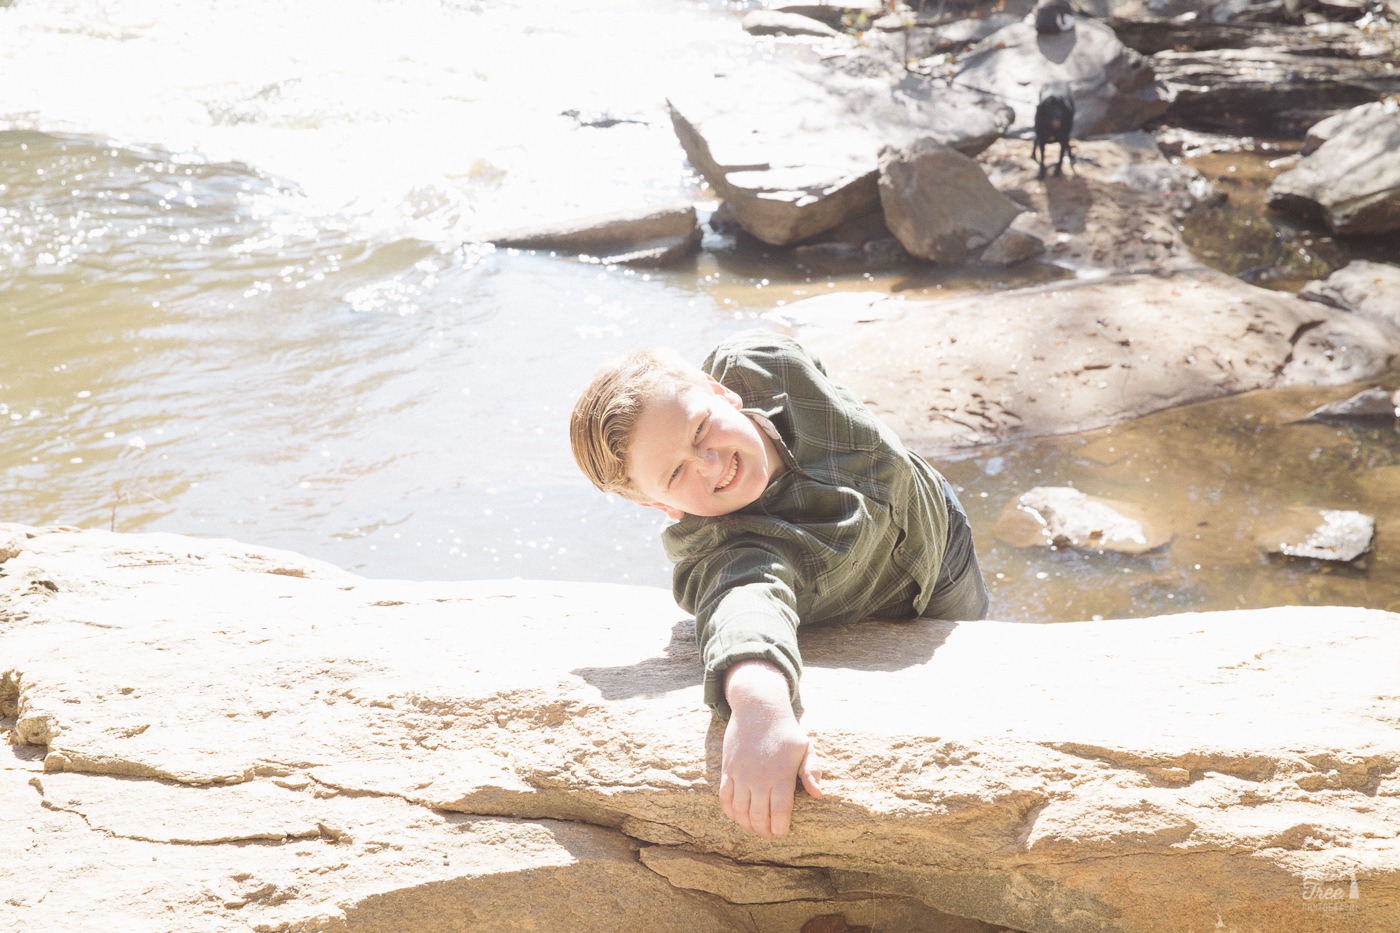 Teenage boy pretending to hang onto cliff by one hand far above the water of Sope Creek.